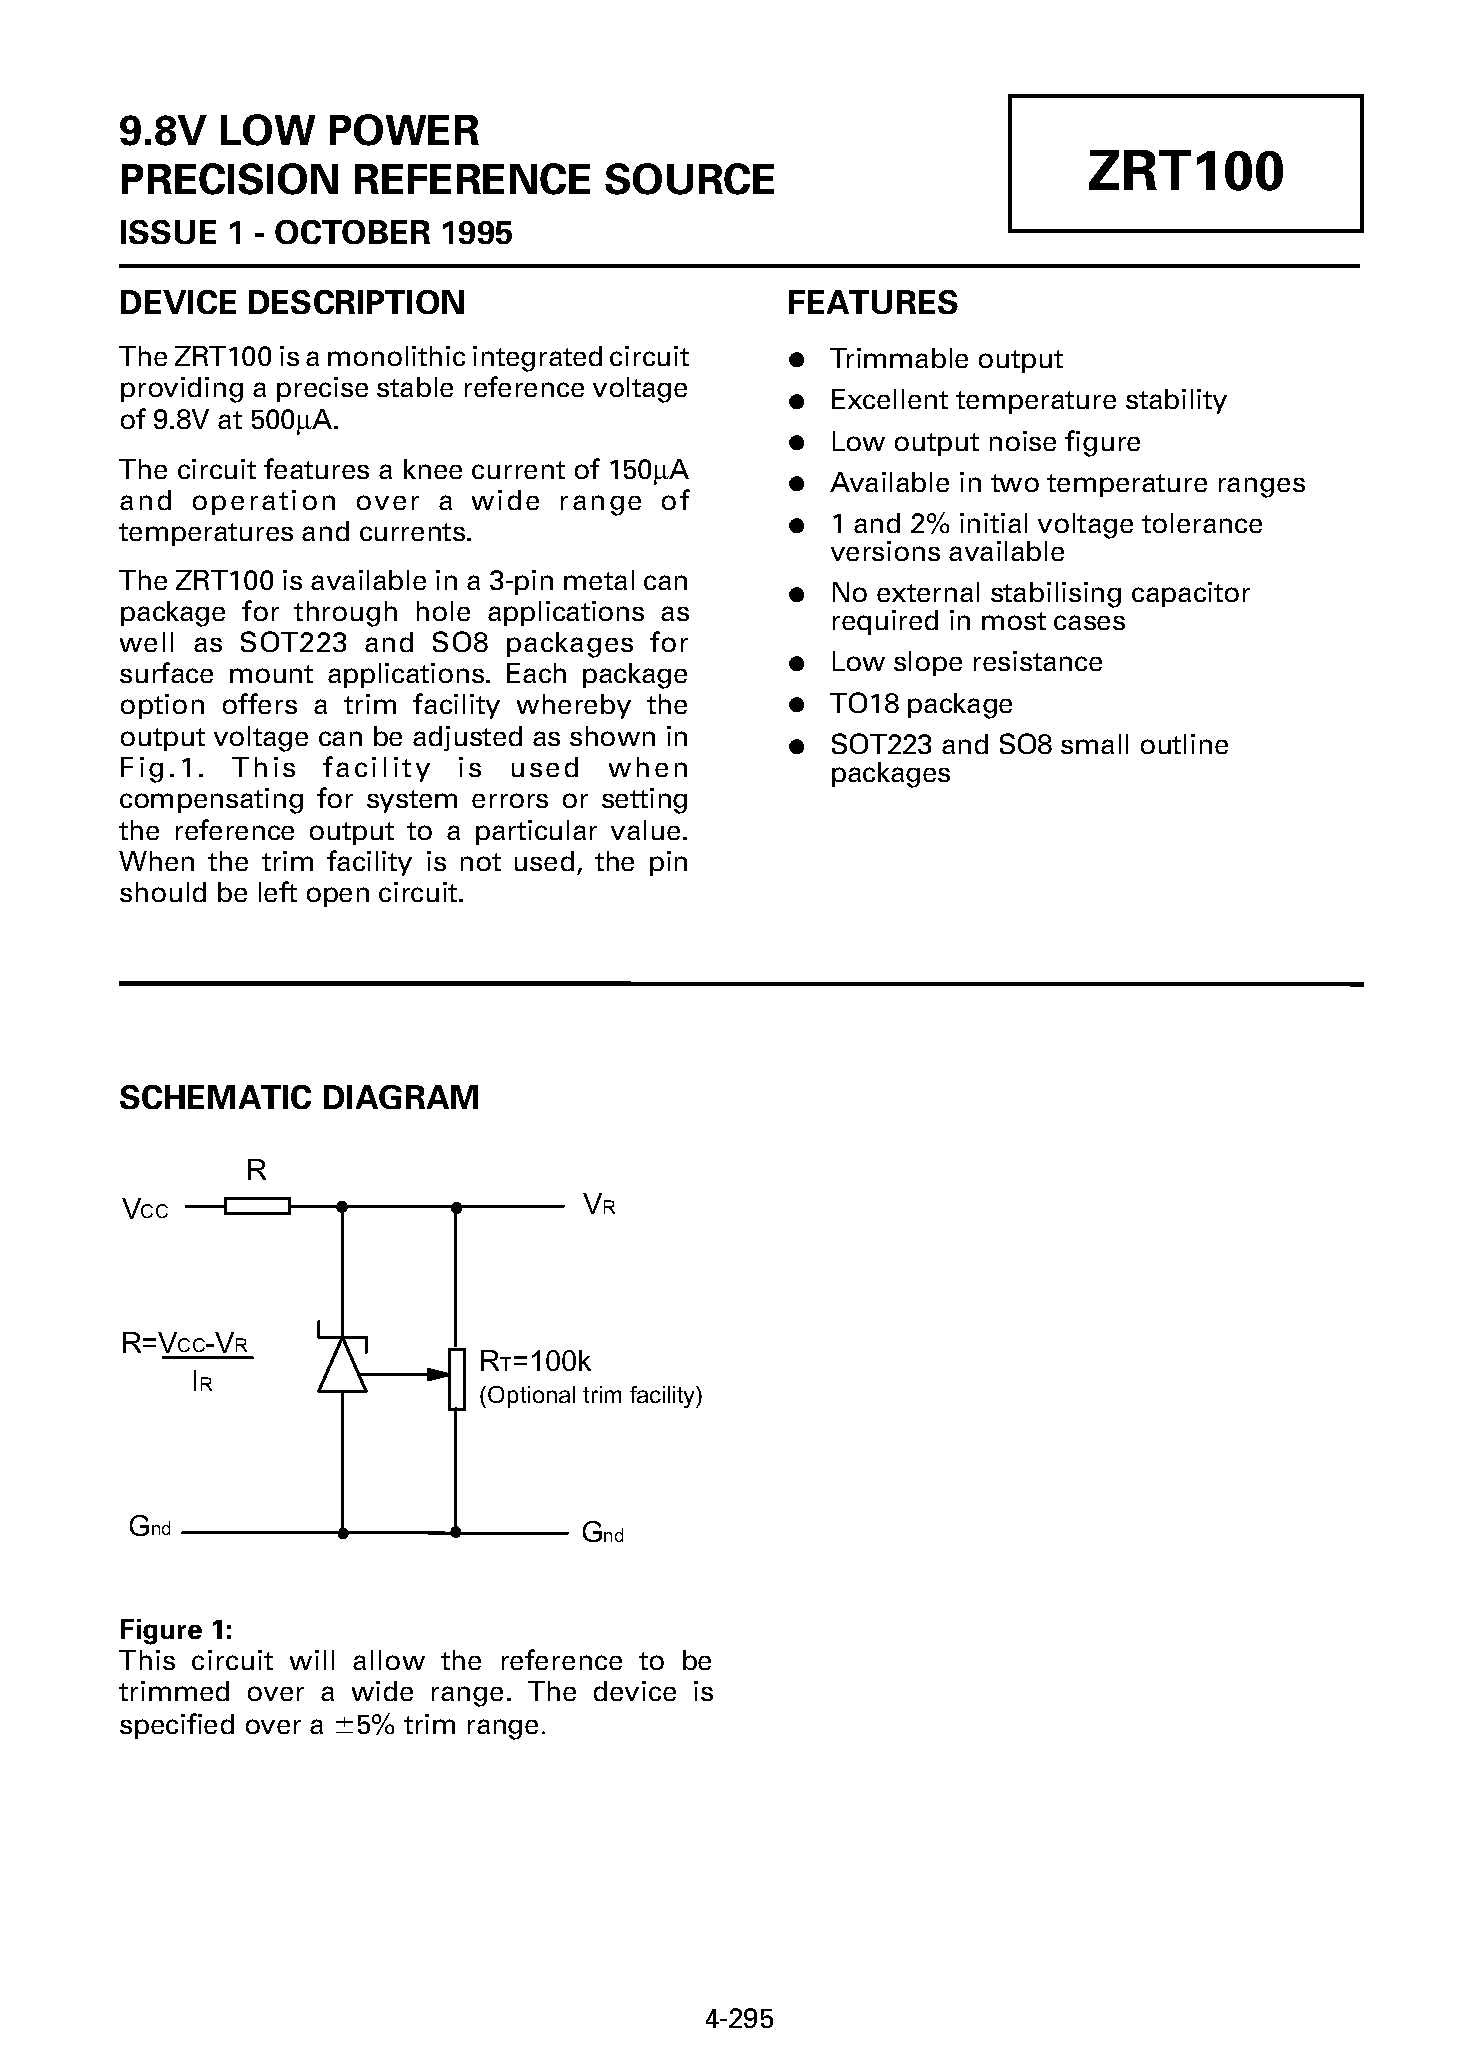 Datasheet ZRT100A1 - 9.8V LOW POWER PRECISION REFERENCE SOURCE page 1